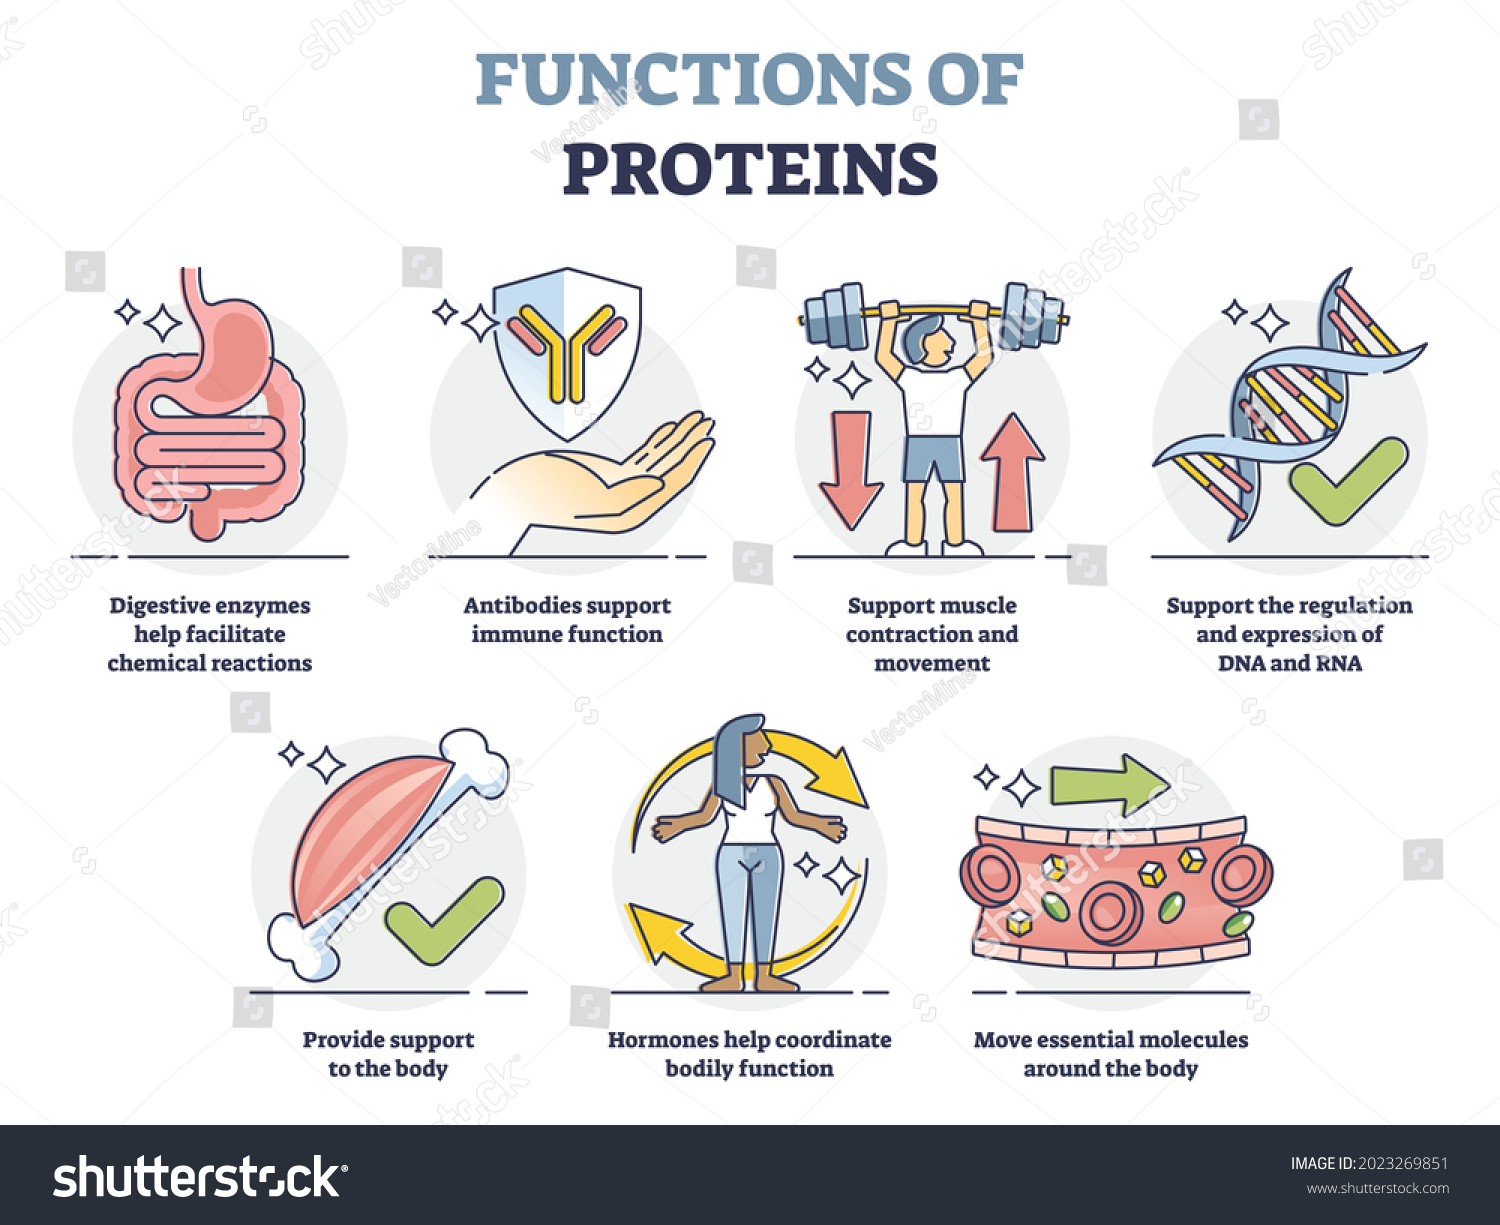 Functions Of Proteins In Human Body 4034